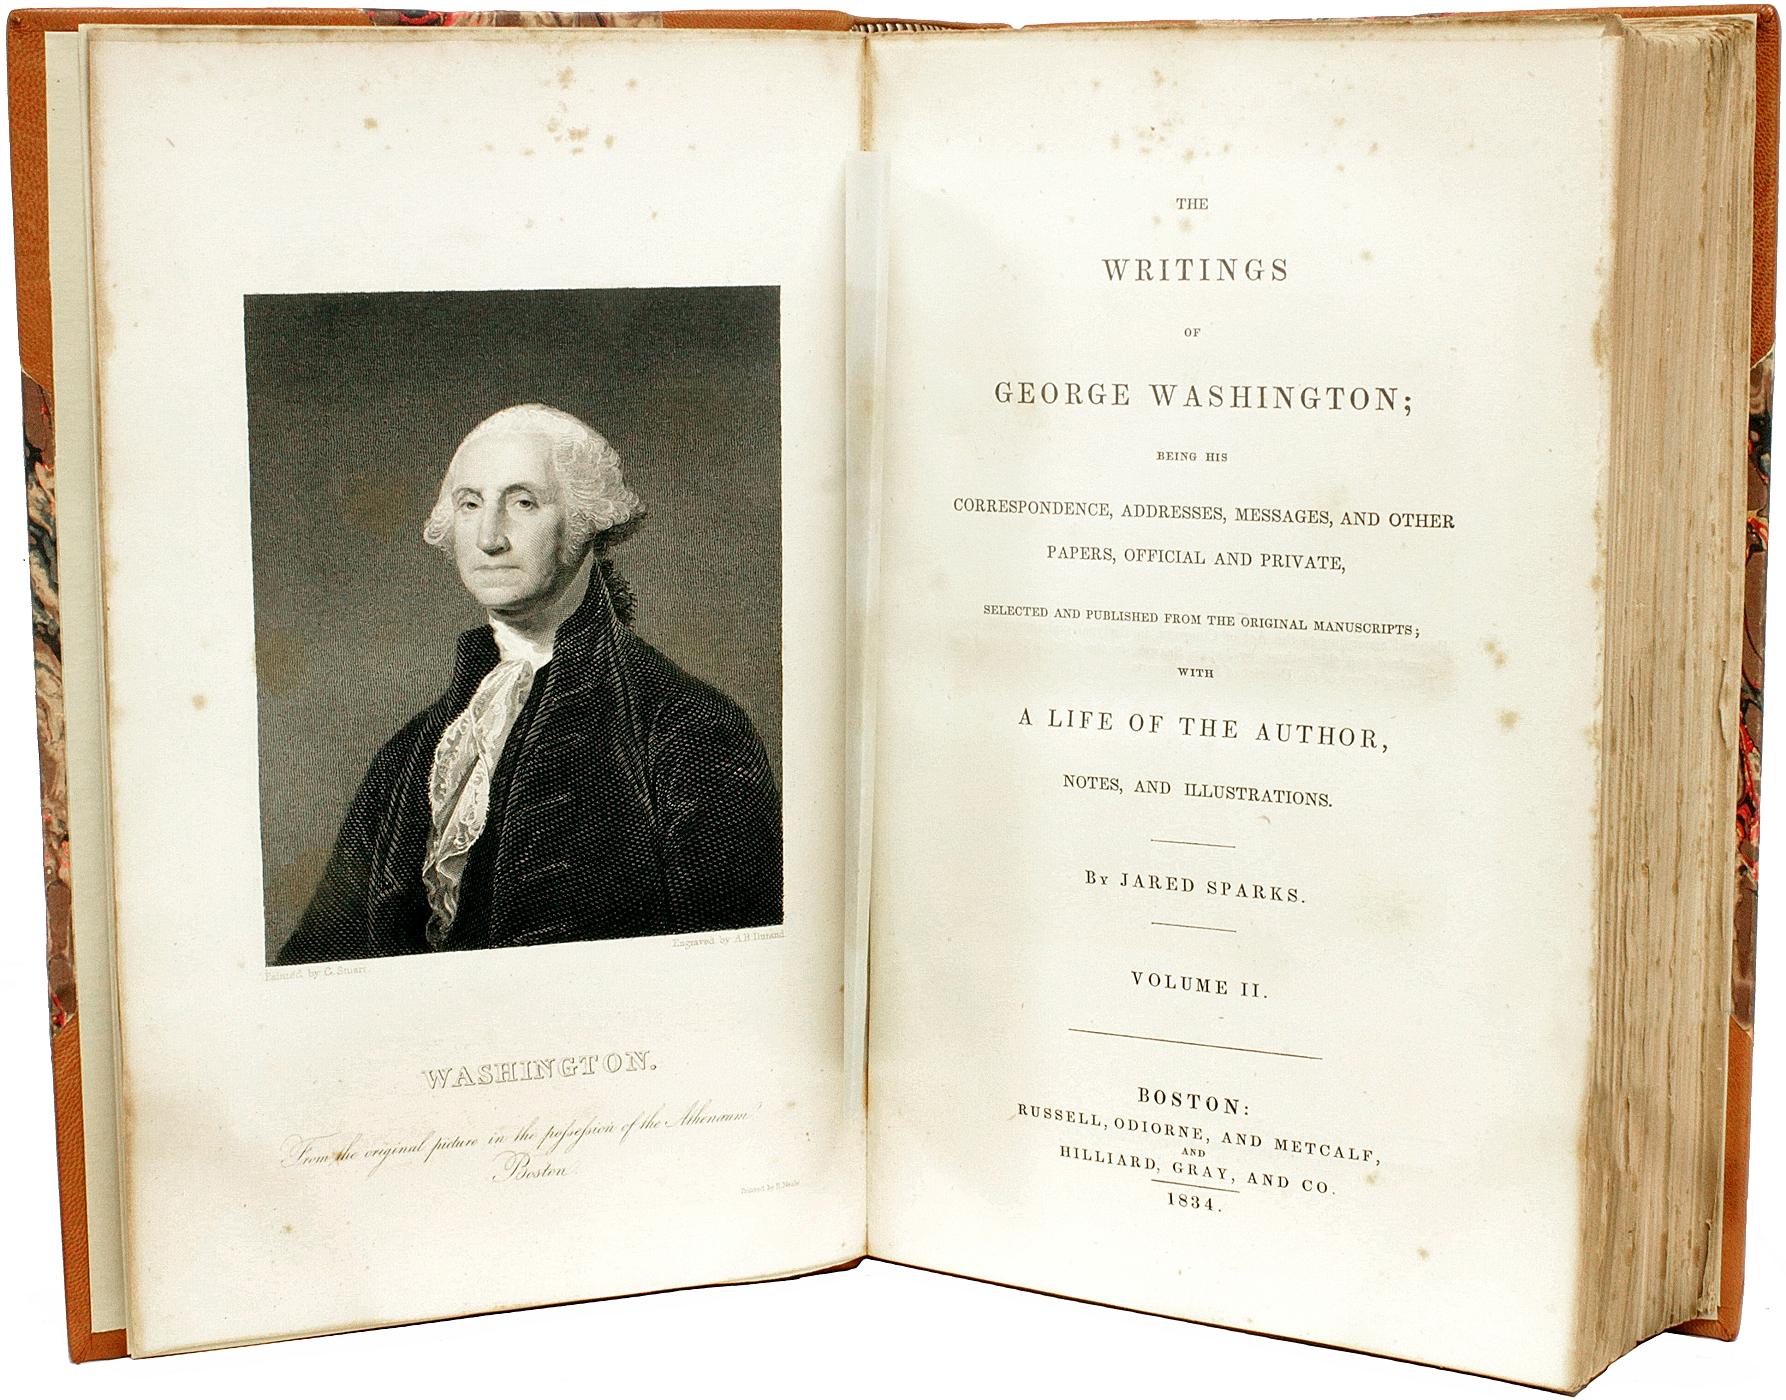 AUTHOR: WASHINGTON, George, edited by Jared Sparks. 

TITLE: The Writings of George Washington: Beings His Correspondence, Addresses, Messages, and Other Papers, Official and Private, Selected and Published from the Original Manuscripts; with A Life